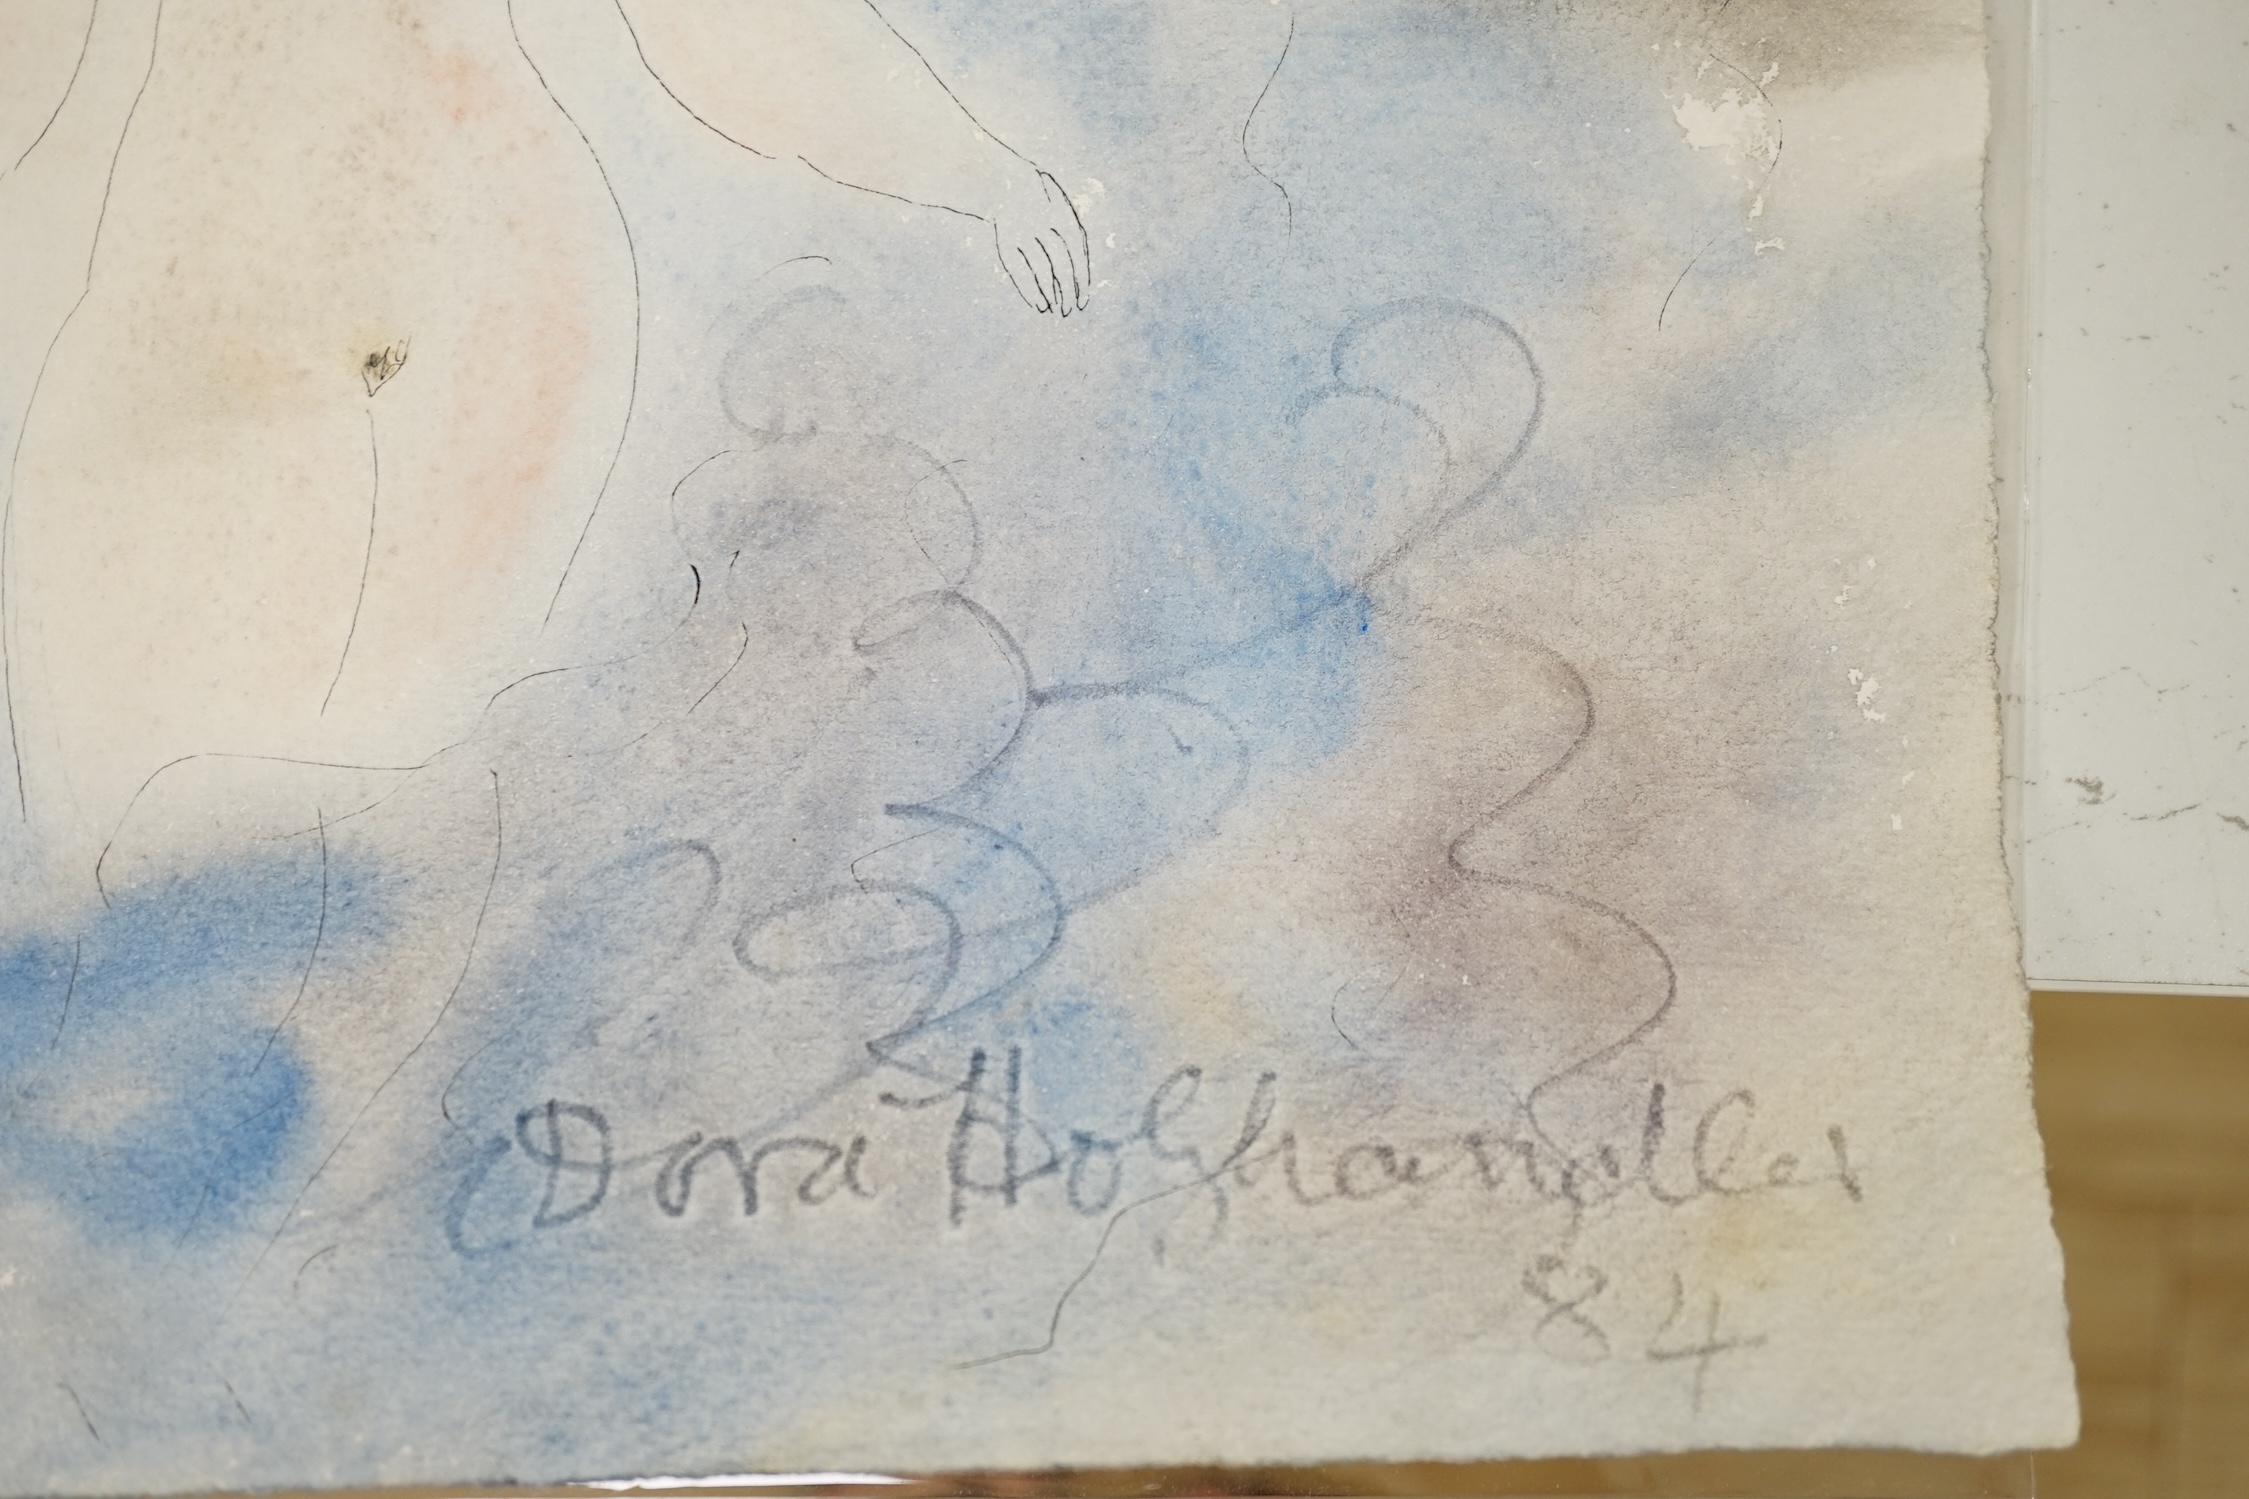 Dora Holzhandler (1928-2015), mixed media on paper, ‘Love of the sea’, signed and dated ‘84, inscribed ‘Painted in Benidorm 5/5/84 verso, unframed